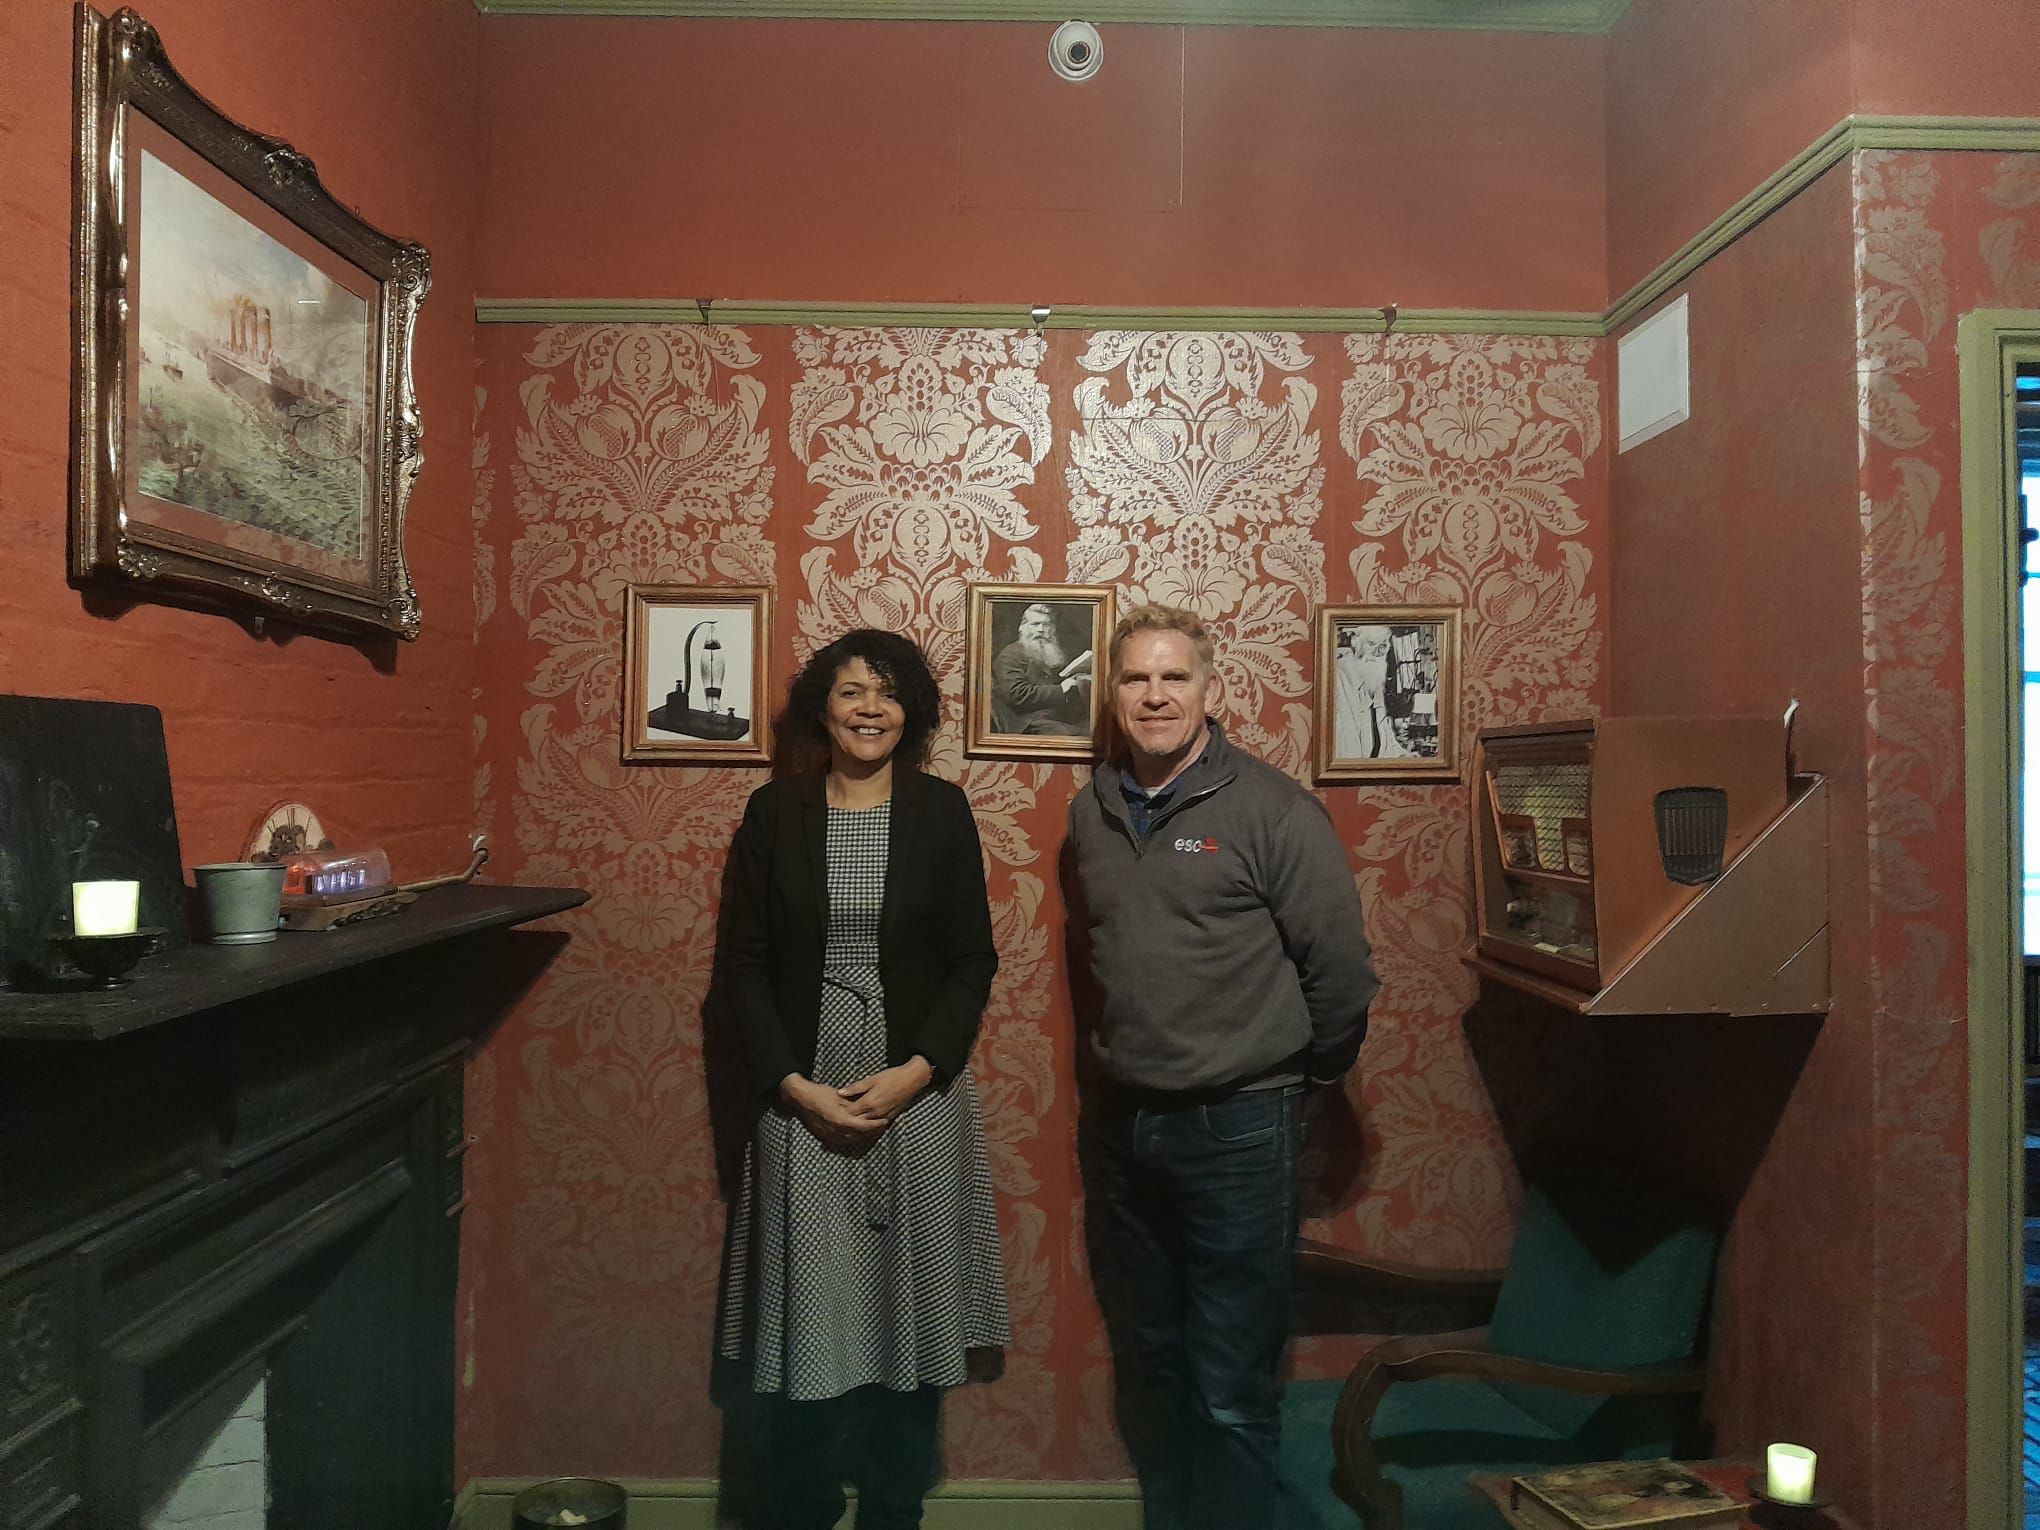 SmallBizSatUK: I visited EscapekeyNE winners of Newcastle City Council’s  Small Business Peoples Choice Awards 2023 Cultural Creative Category.  It’s a fantastic family run biz with games inspired by Newcastle heritage.